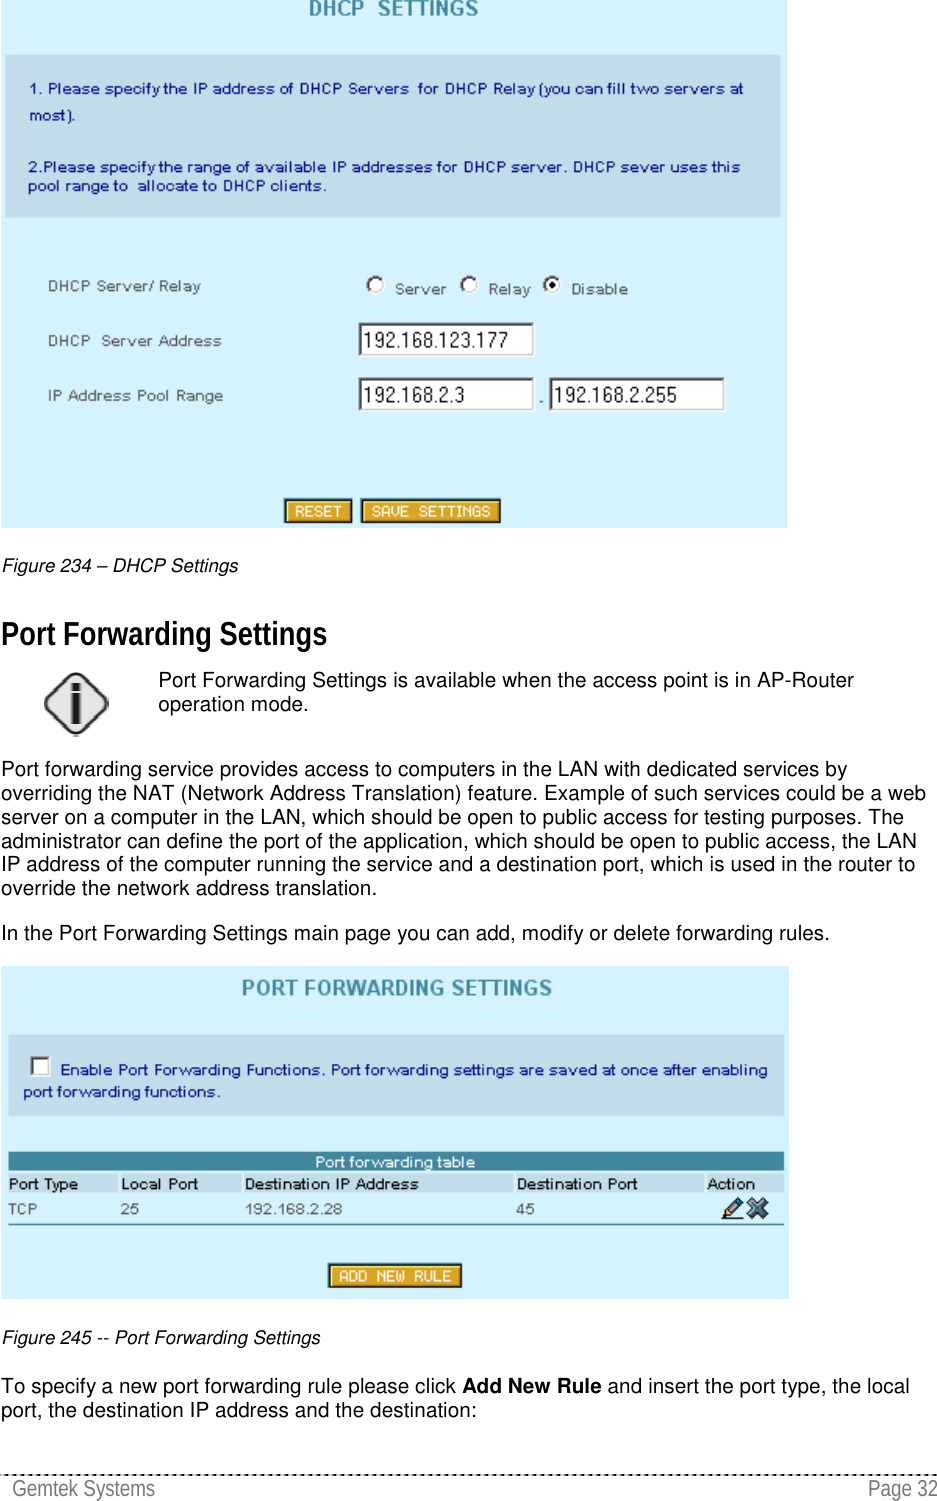 Gemtek Systems Page 32Figure 234 – DHCP SettingsPort Forwarding SettingsPort Forwarding Settings is available when the access point is in AP-Routeroperation mode.Port forwarding service provides access to computers in the LAN with dedicated services byoverriding the NAT (Network Address Translation) feature. Example of such services could be a webserver on a computer in the LAN, which should be open to public access for testing purposes. Theadministrator can define the port of the application, which should be open to public access, the LANIP address of the computer running the service and a destination port, which is used in the router tooverride the network address translation.In the Port Forwarding Settings main page you can add, modify or delete forwarding rules.Figure 245 -- Port Forwarding SettingsTo specify a new port forwarding rule please click Add New Rule and insert the port type, the localport, the destination IP address and the destination: